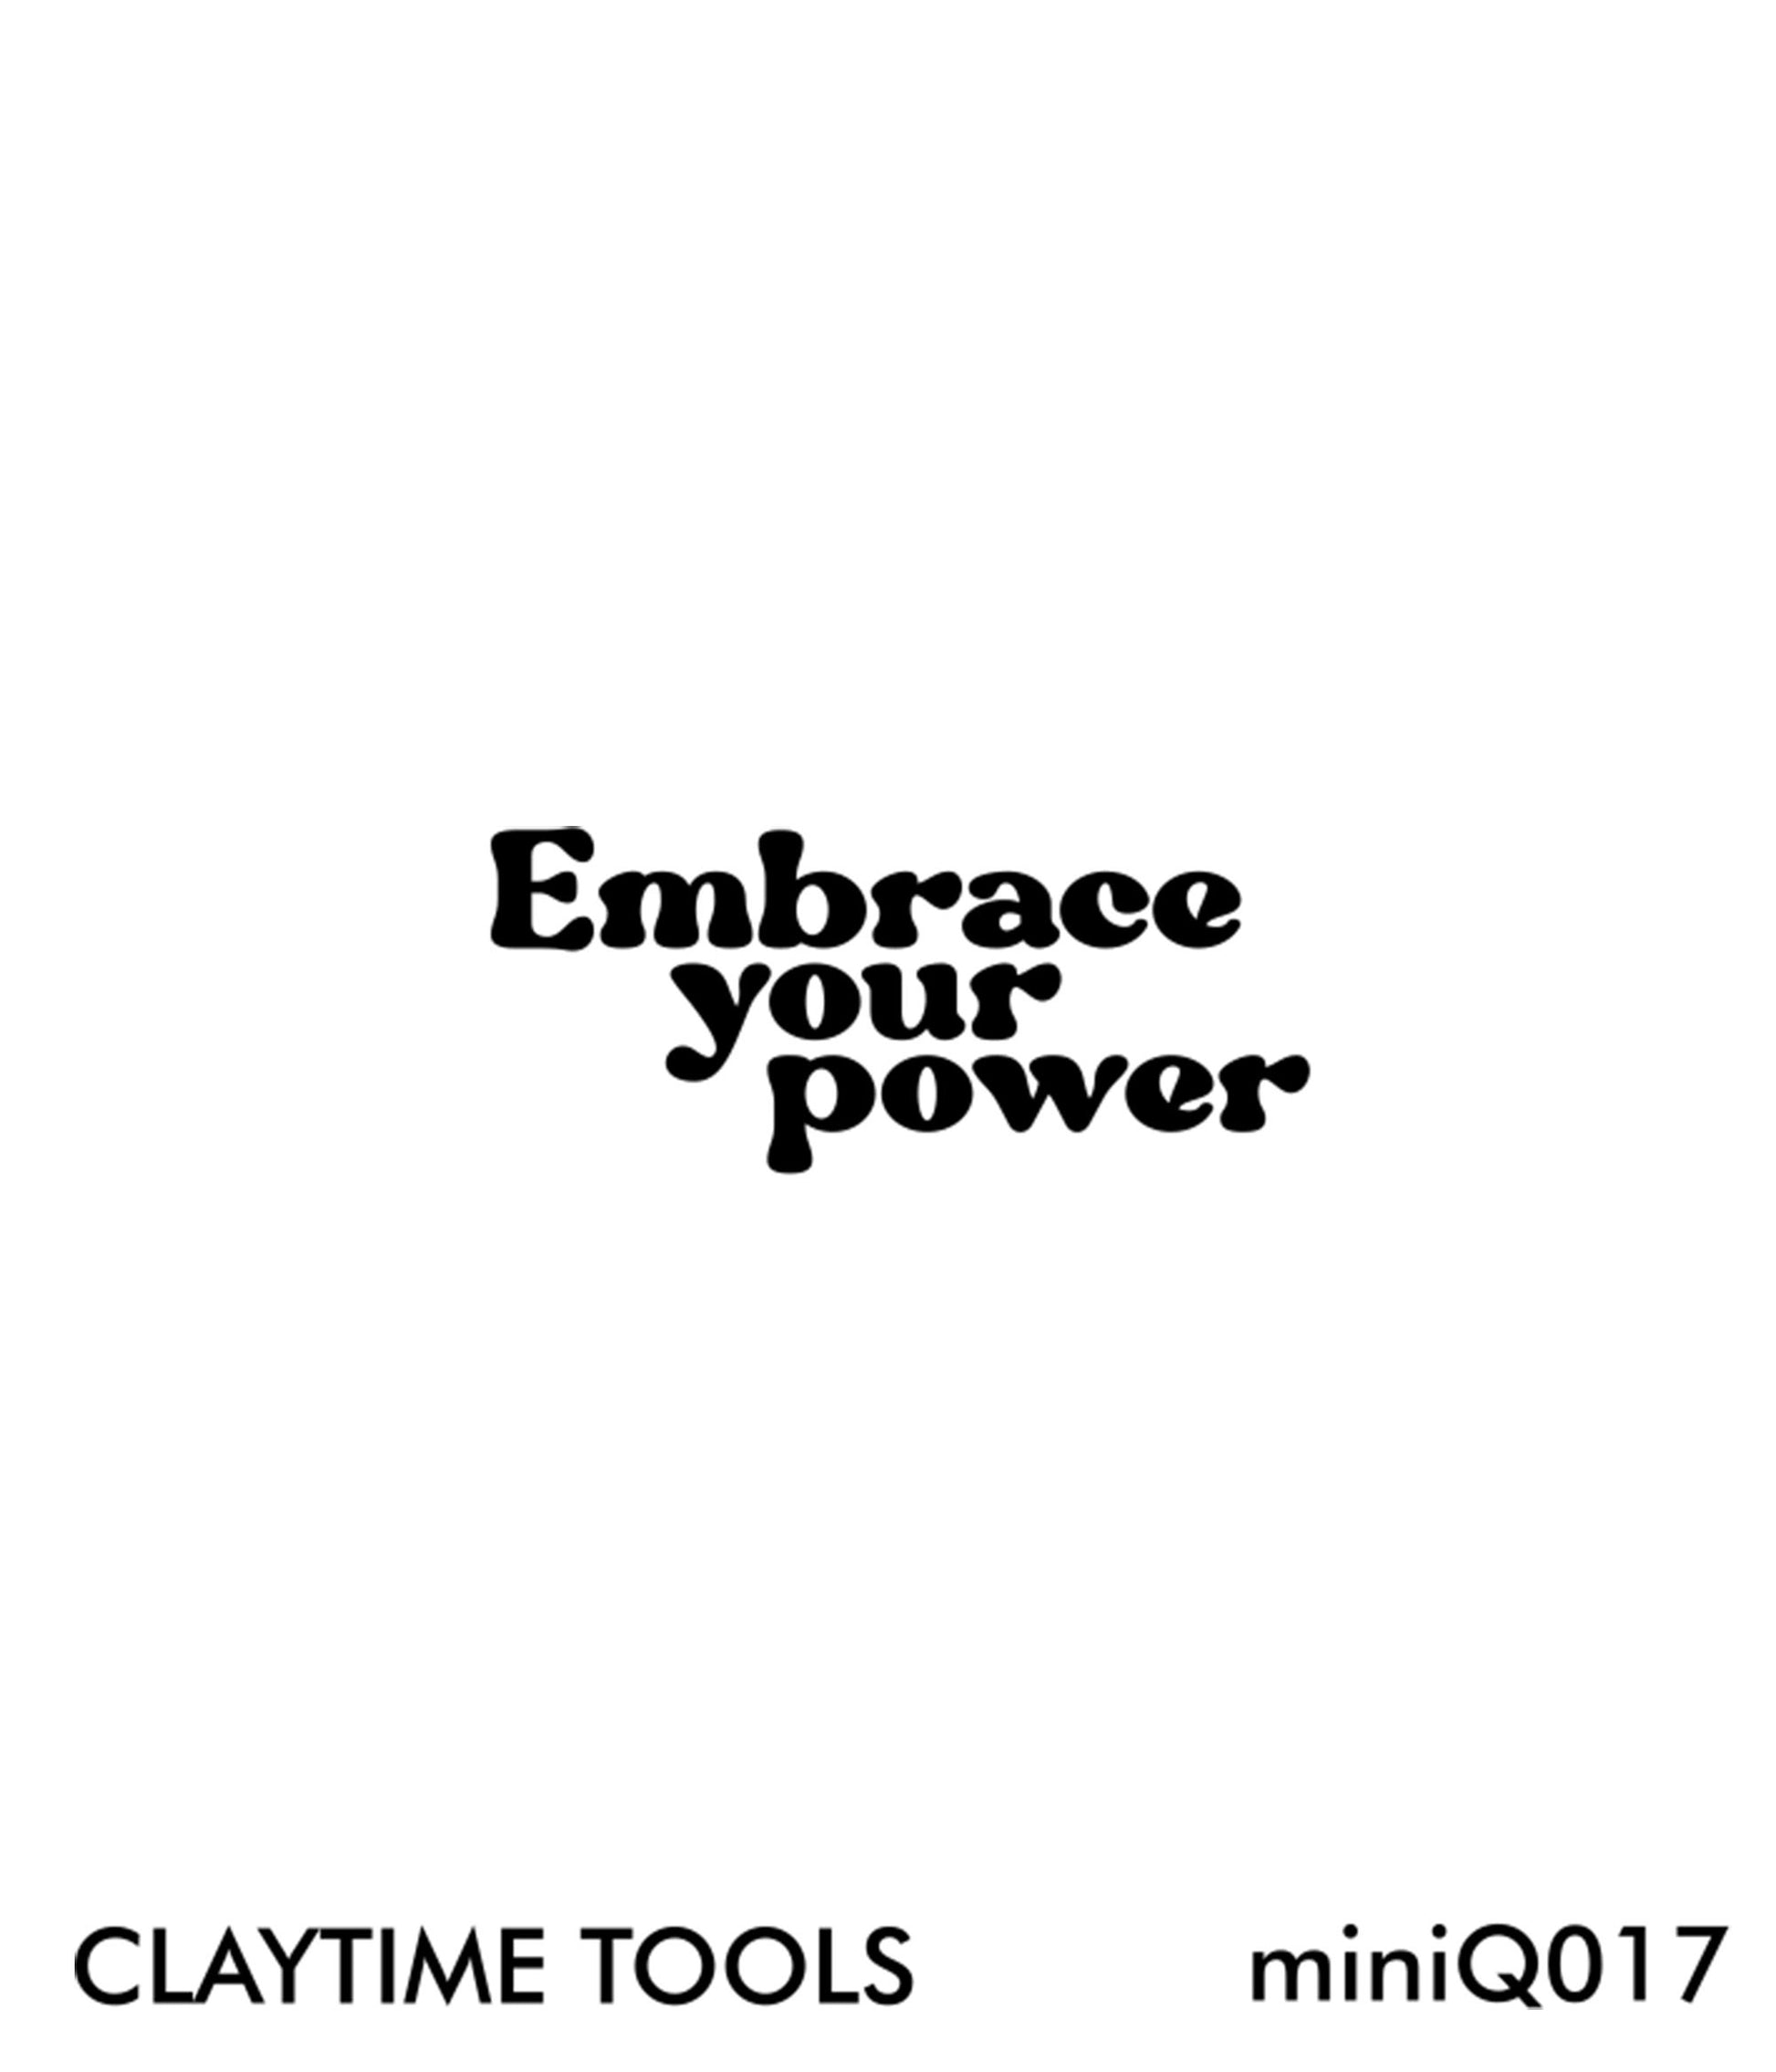 Mini silkscreen "Embrace your power" on a white background